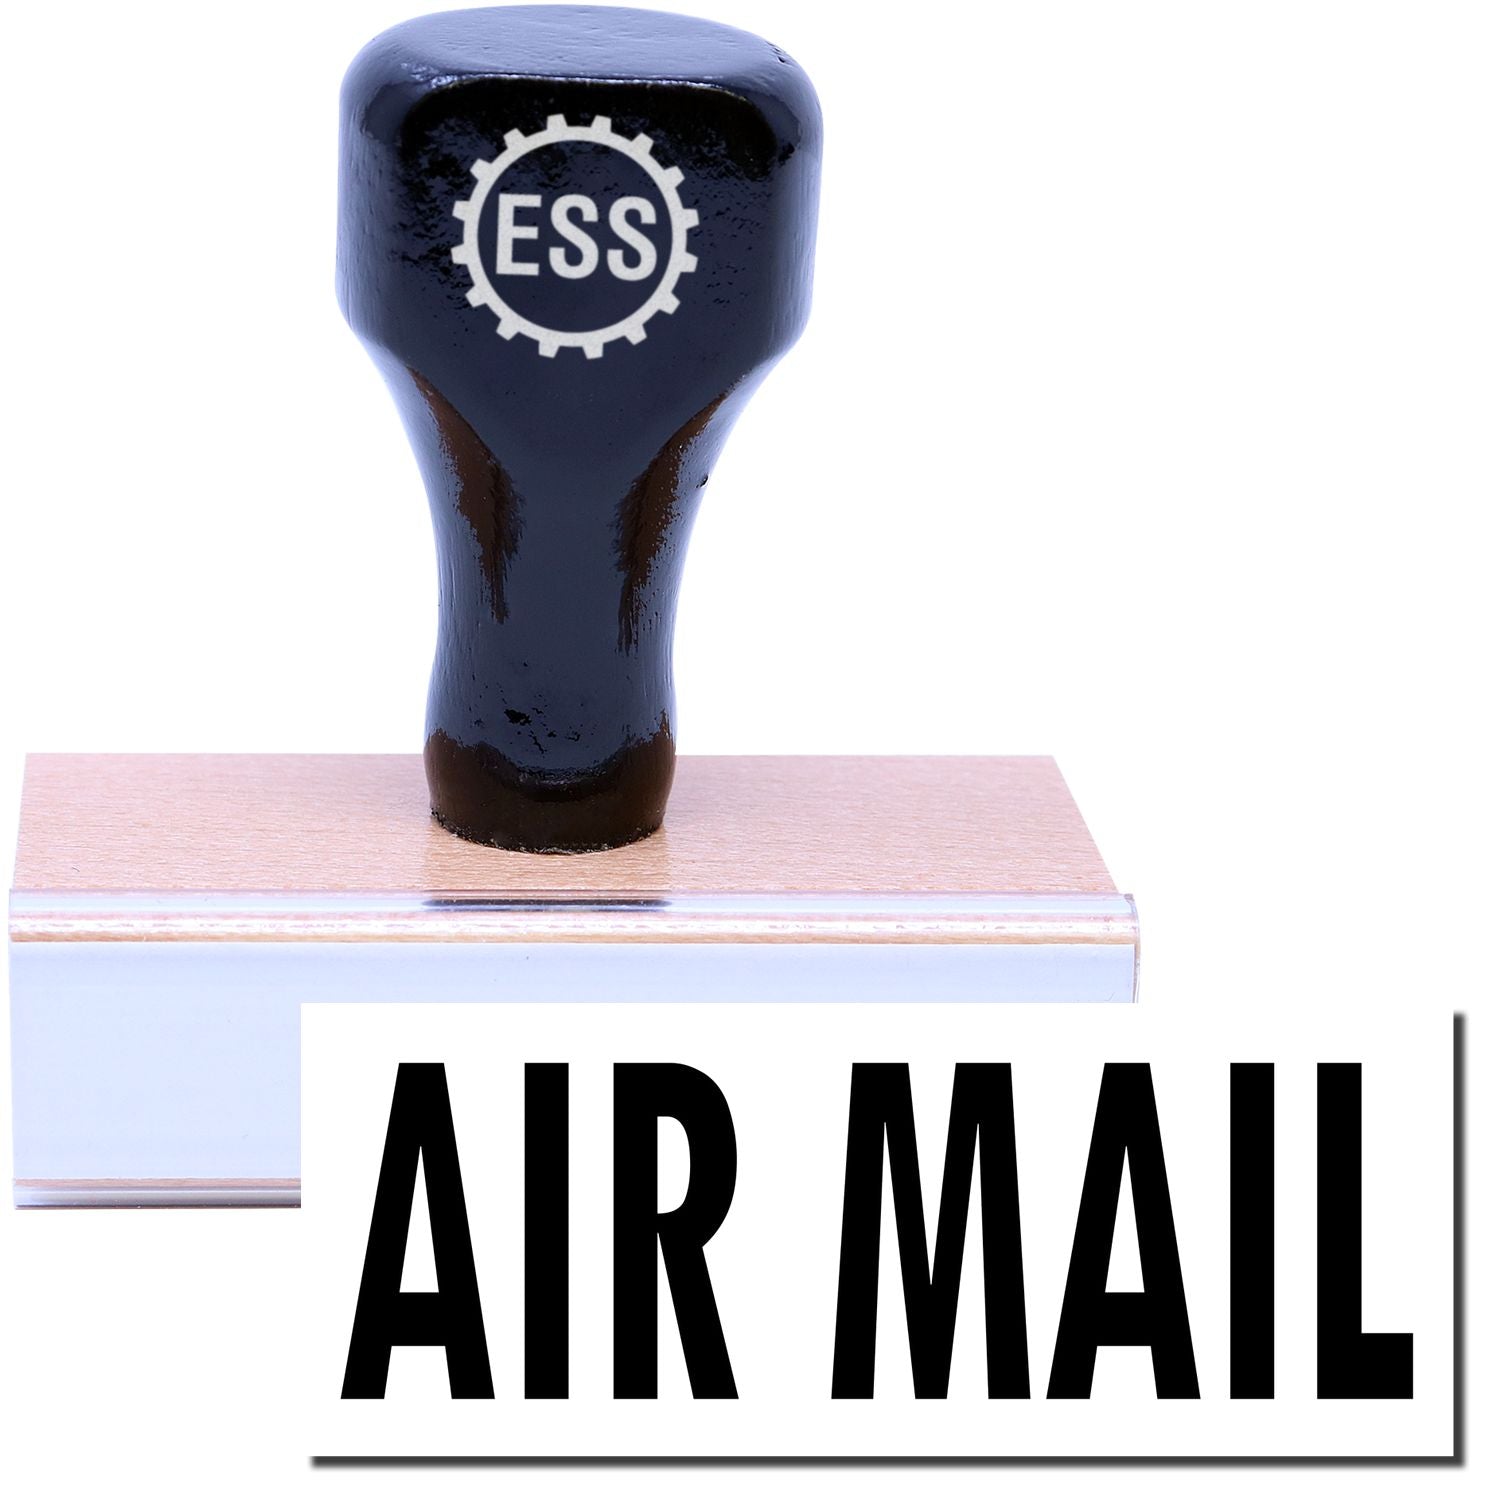 A stock office rubber stamp with a stamped image showing how the text "AIR MAIL" is displayed after stamping.